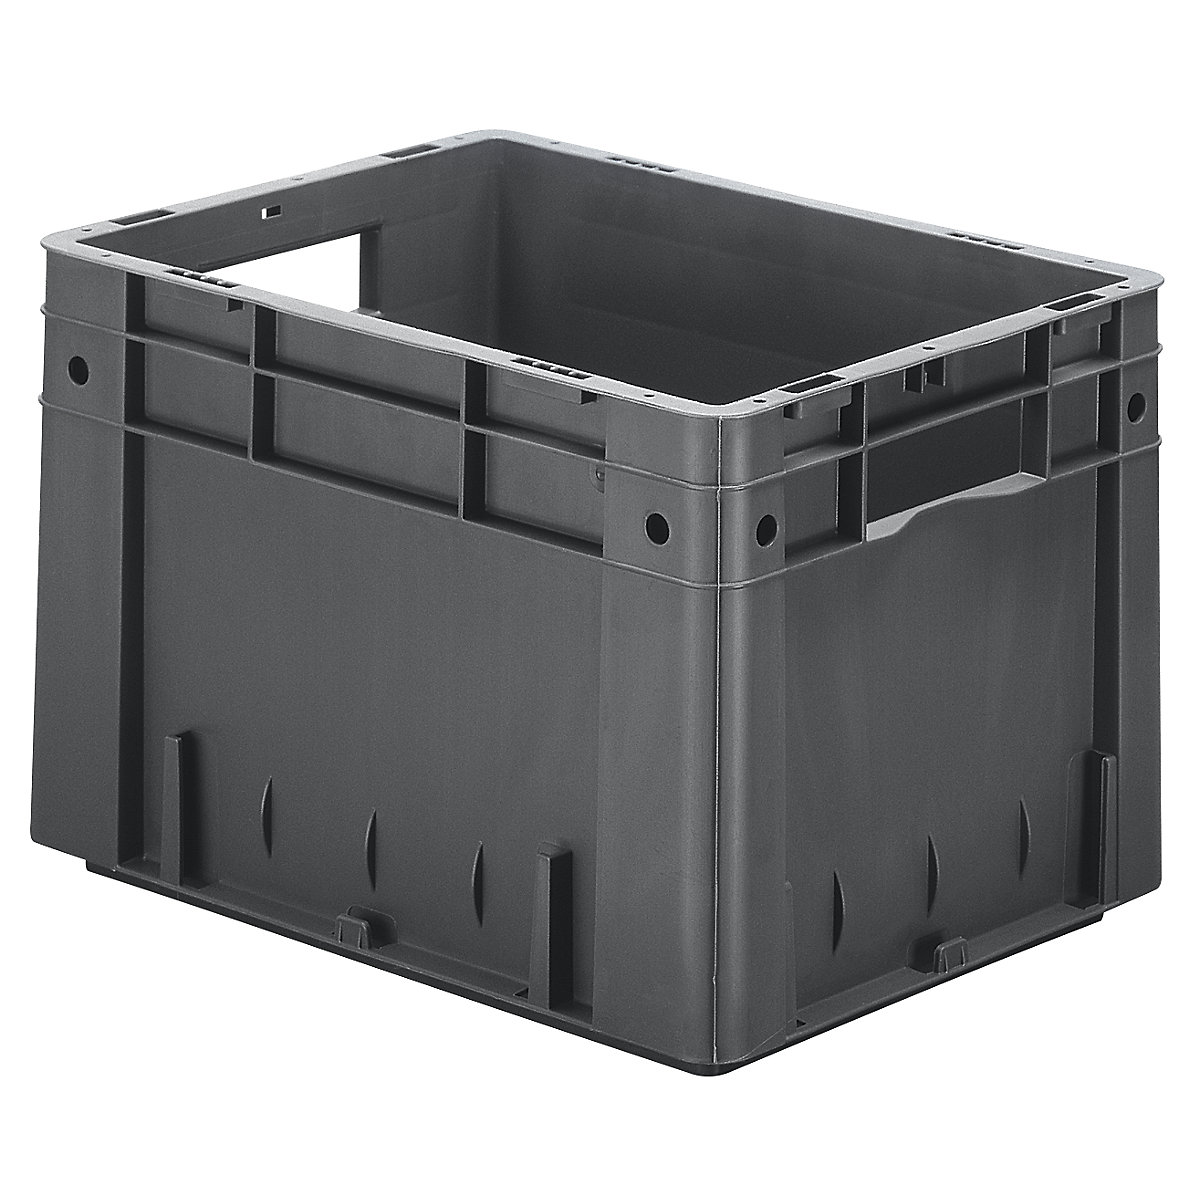 Heavy duty Euro container, polypropylene, capacity 23.3 l, LxWxH 400 x 300 x 270 mm, solid walls, solid base, grey, pack of 4